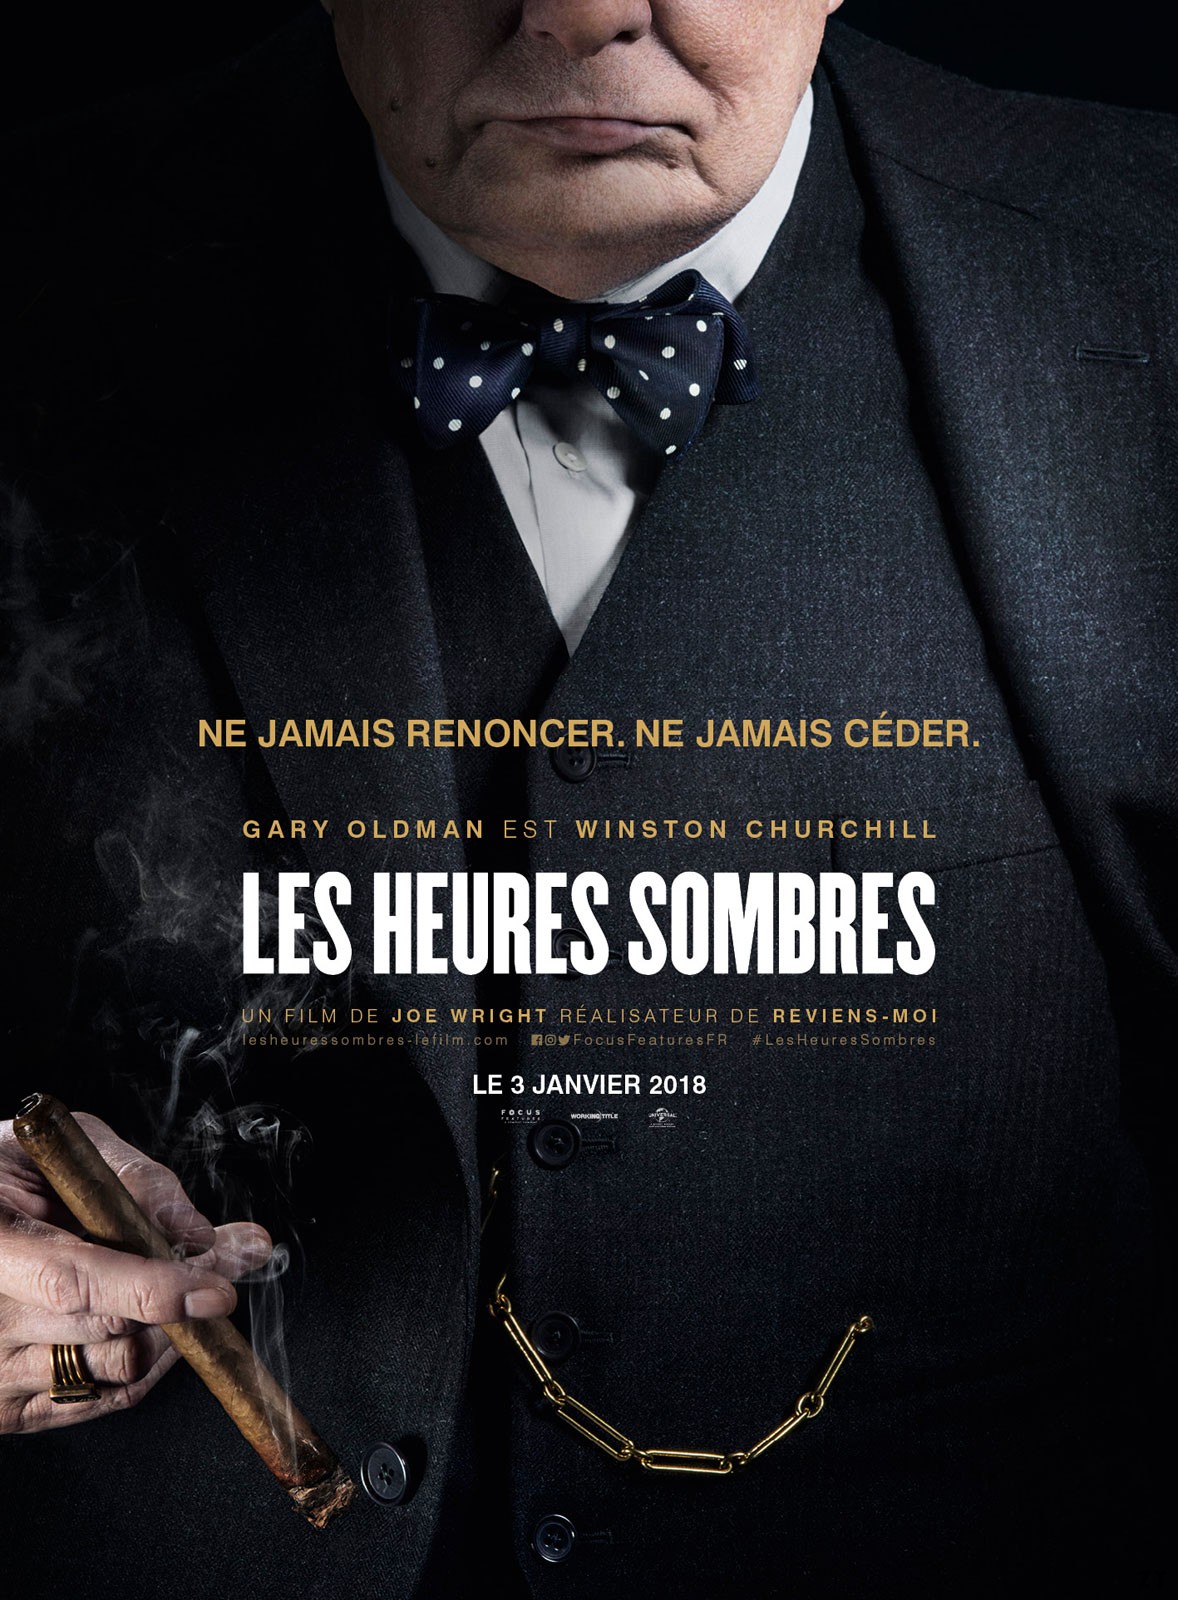 Les heures sombres FRENCH WEBRIP 1080p 2018